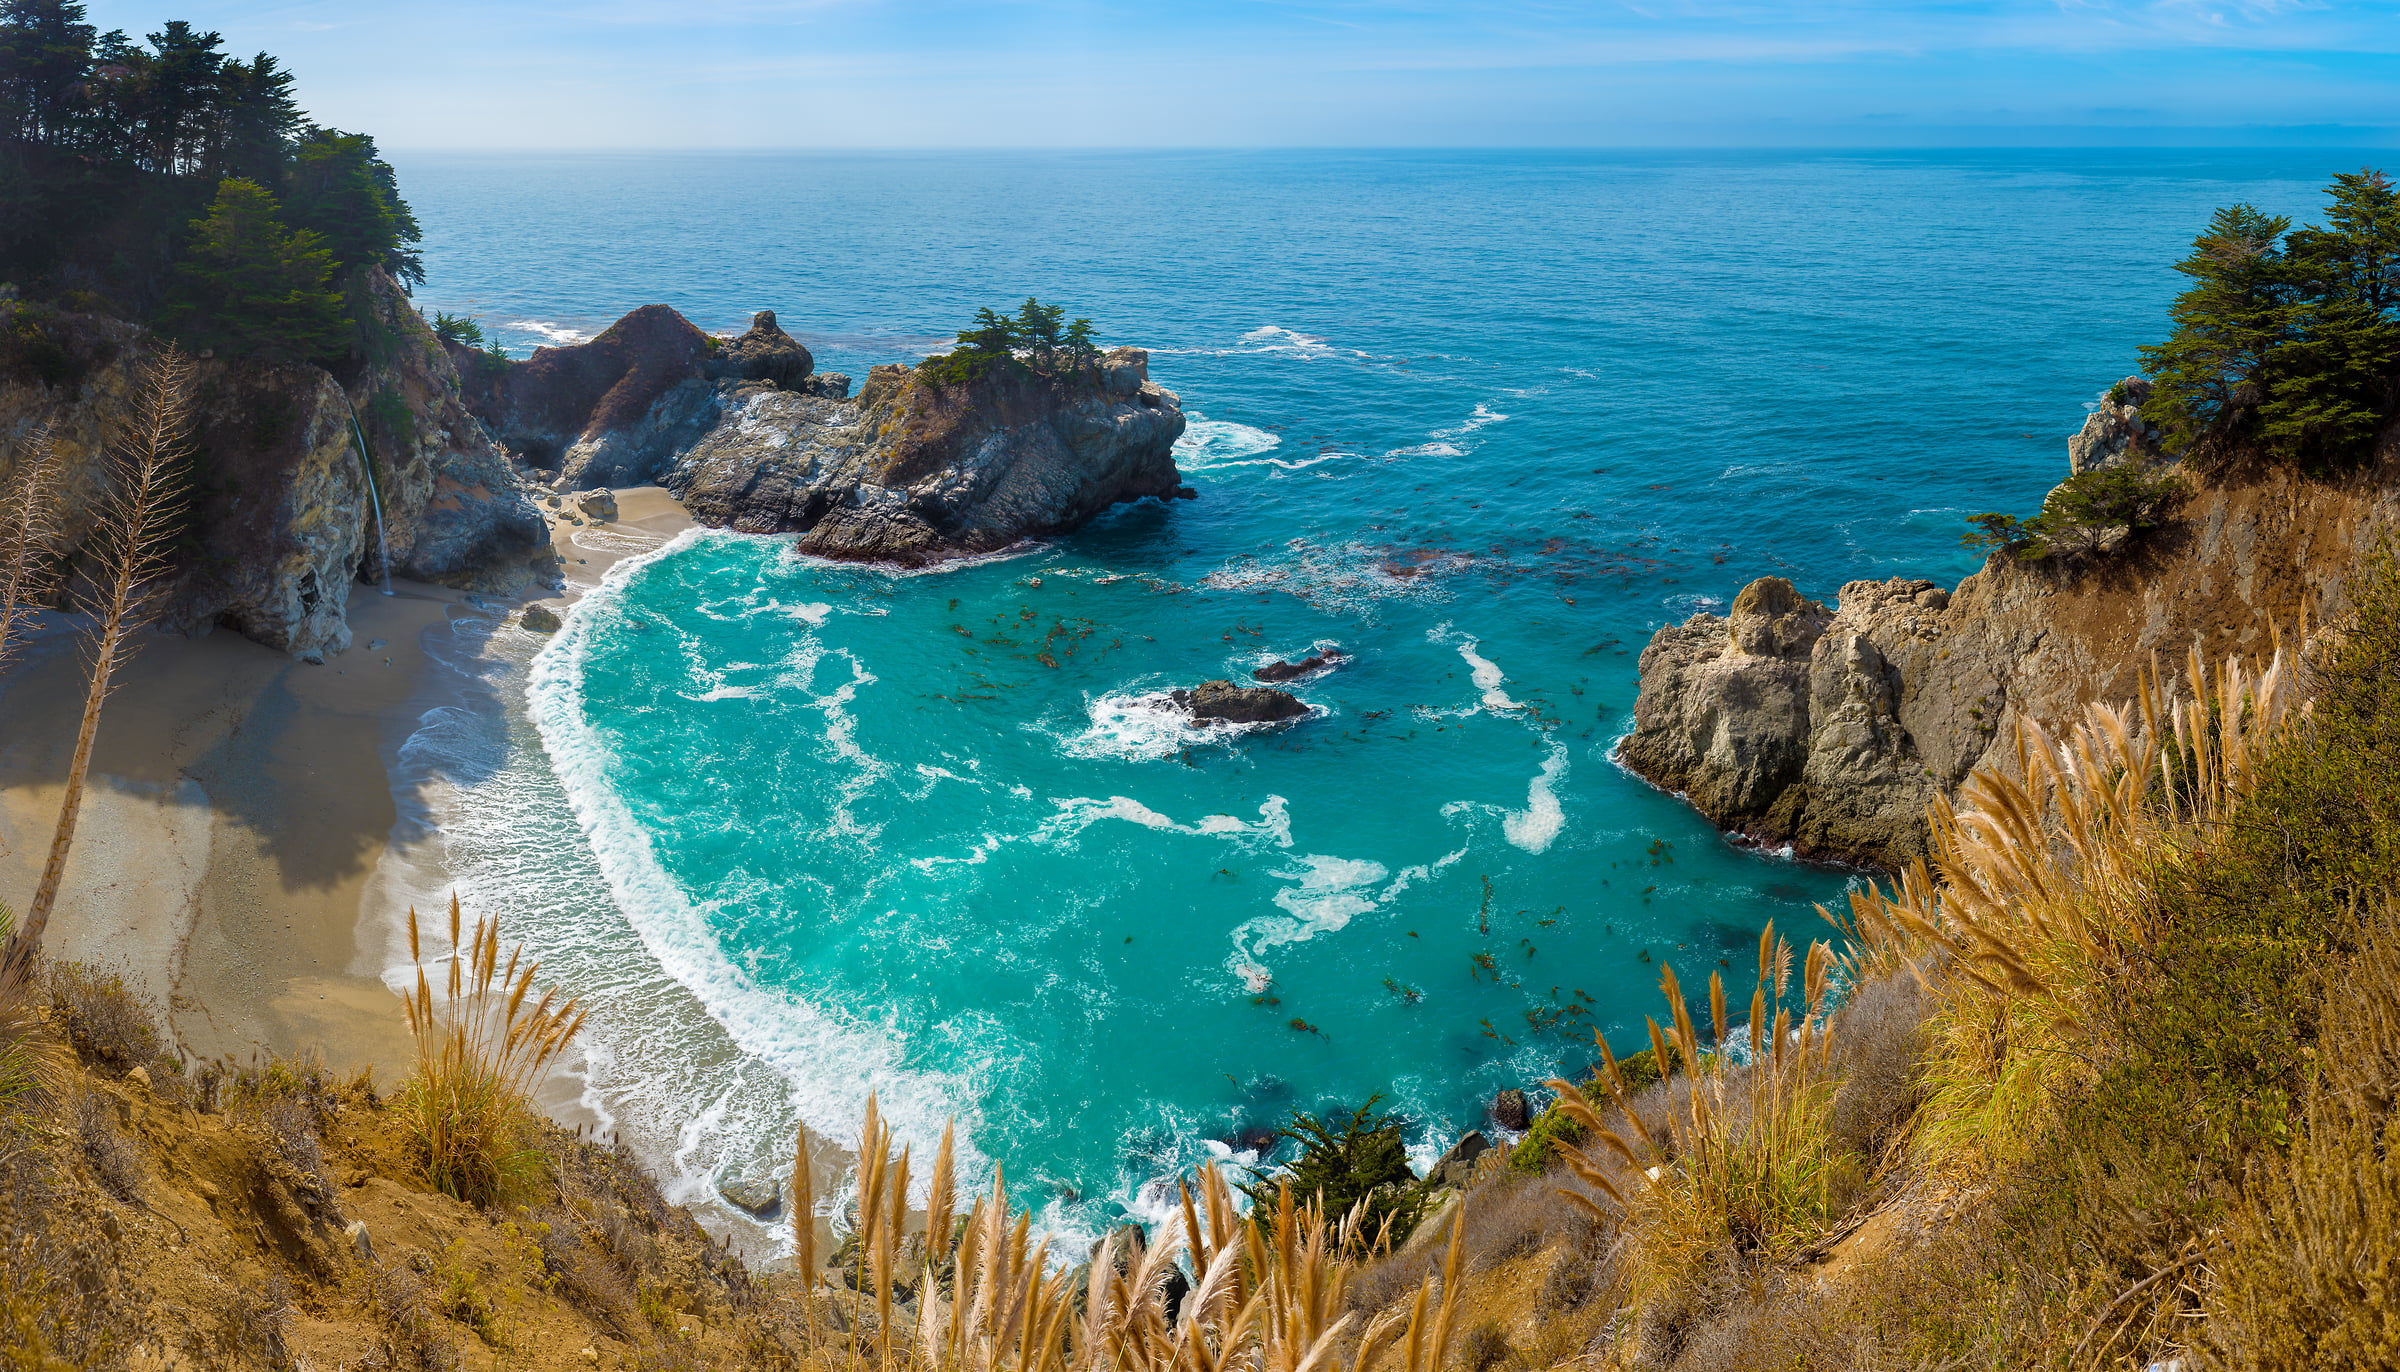 404 megapixels! A very high resolution, large-format VAST photo of a beach, waterfall, and the ocean; fine art photograph created by Jim Tarpo in Big Sur, California